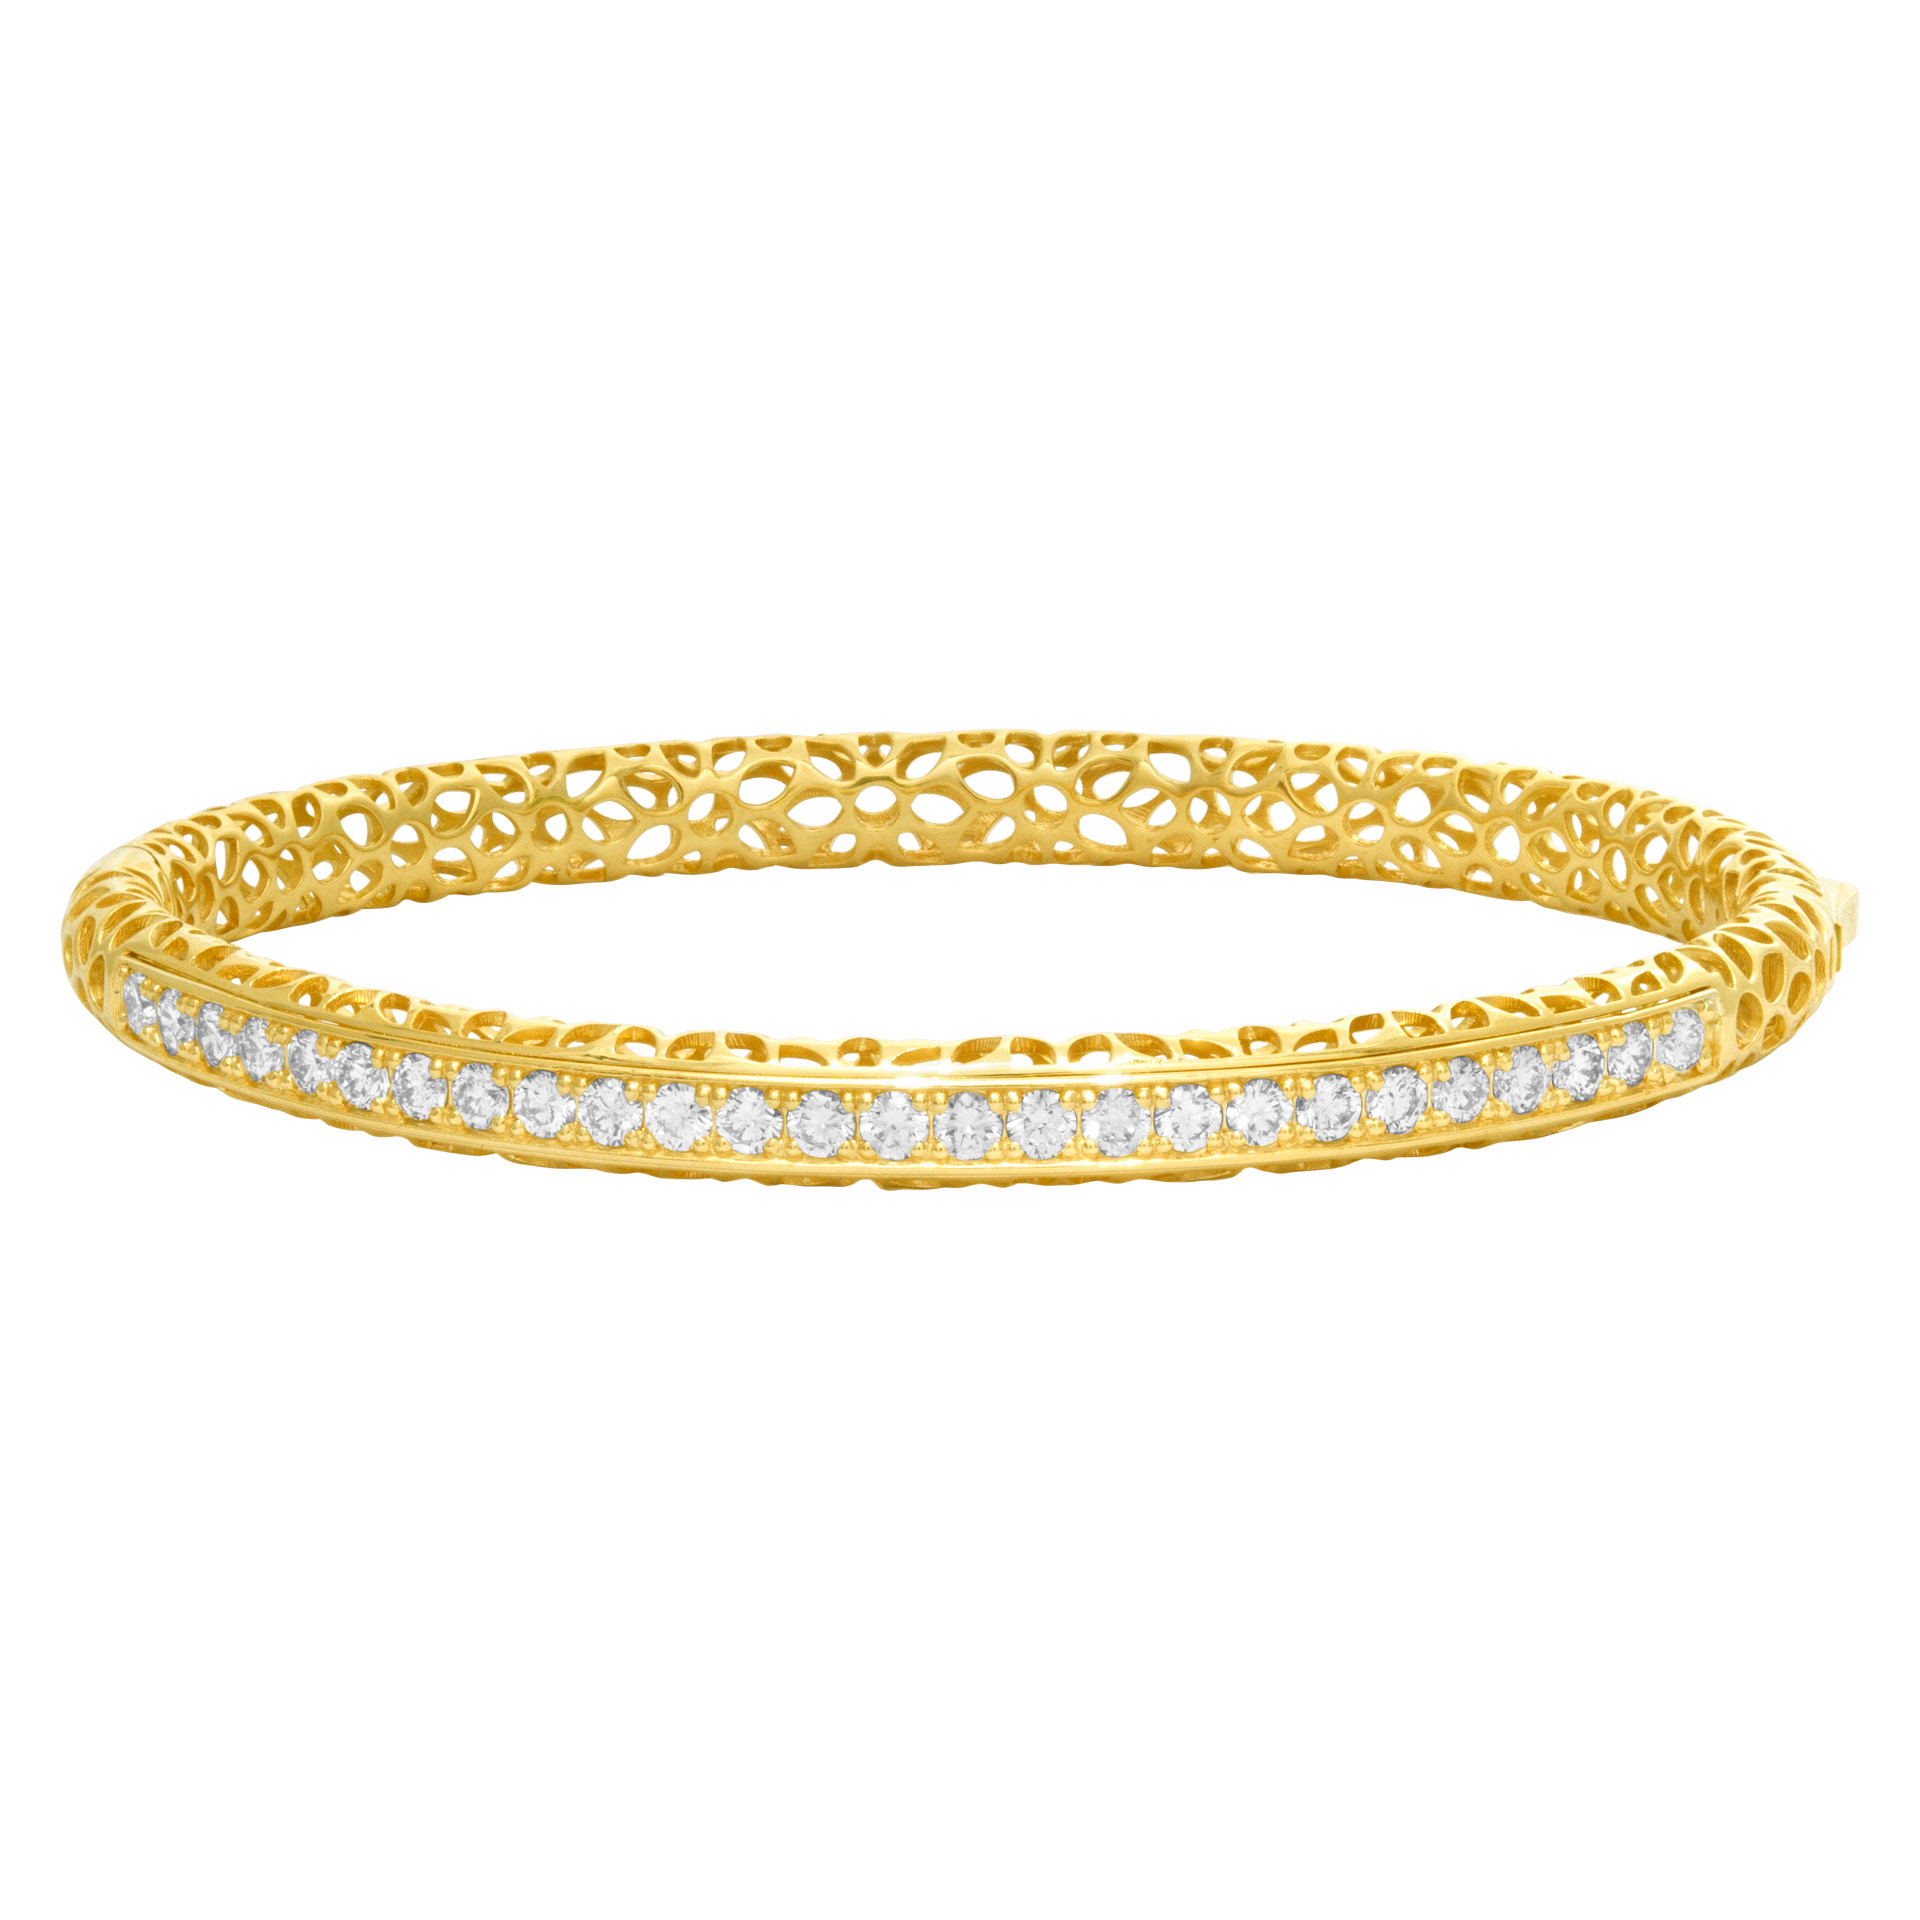 Diamond bangle with 1.47 cts in diamonds (G-H color, VS clarity) set in 18k image 1